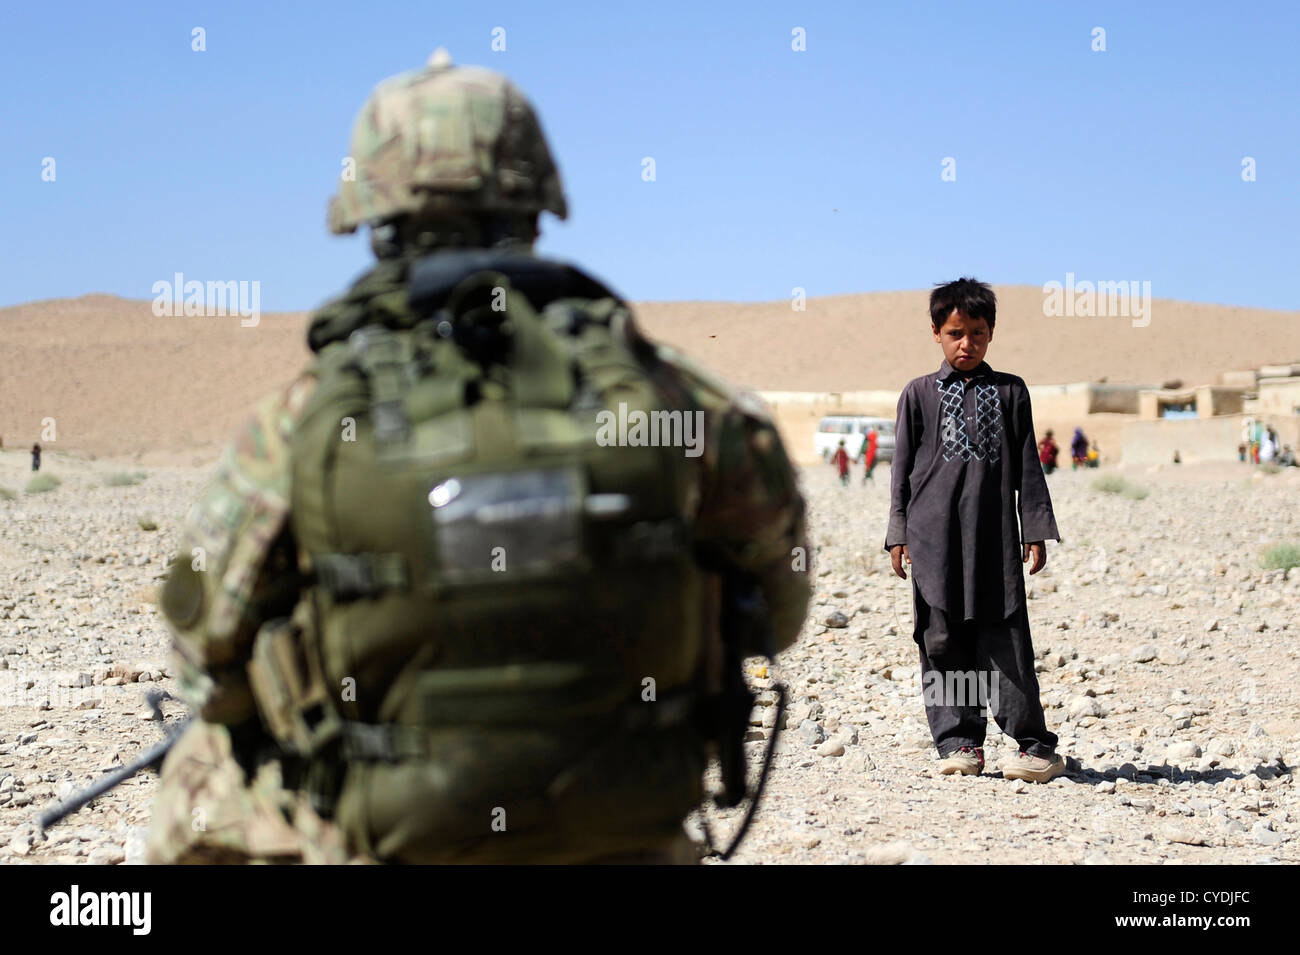 A local Afghan boy watches as members of the US Army and Navy make their way through his village September 26, 2012 in Pur Chaman district, Farah province, Afghanistan. The Provincial Reconstruction Team Farah marks the first time coalition forces have been to the Pur Chaman district in over a year. Stock Photo